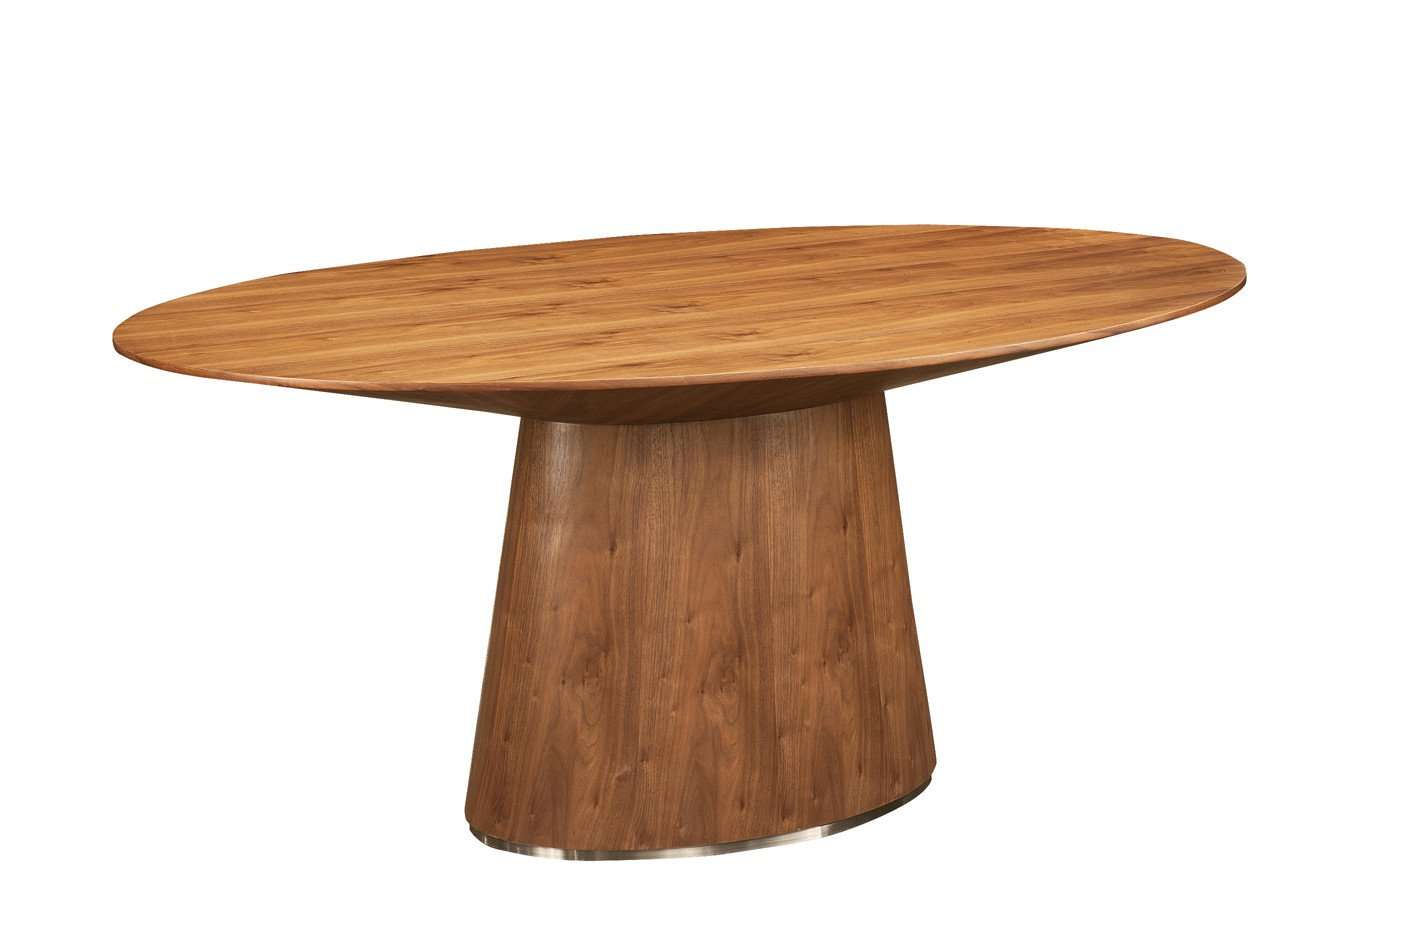 MOES-OTAGO OVAL DINING TABLE-Dining Tables-MODTEMPO